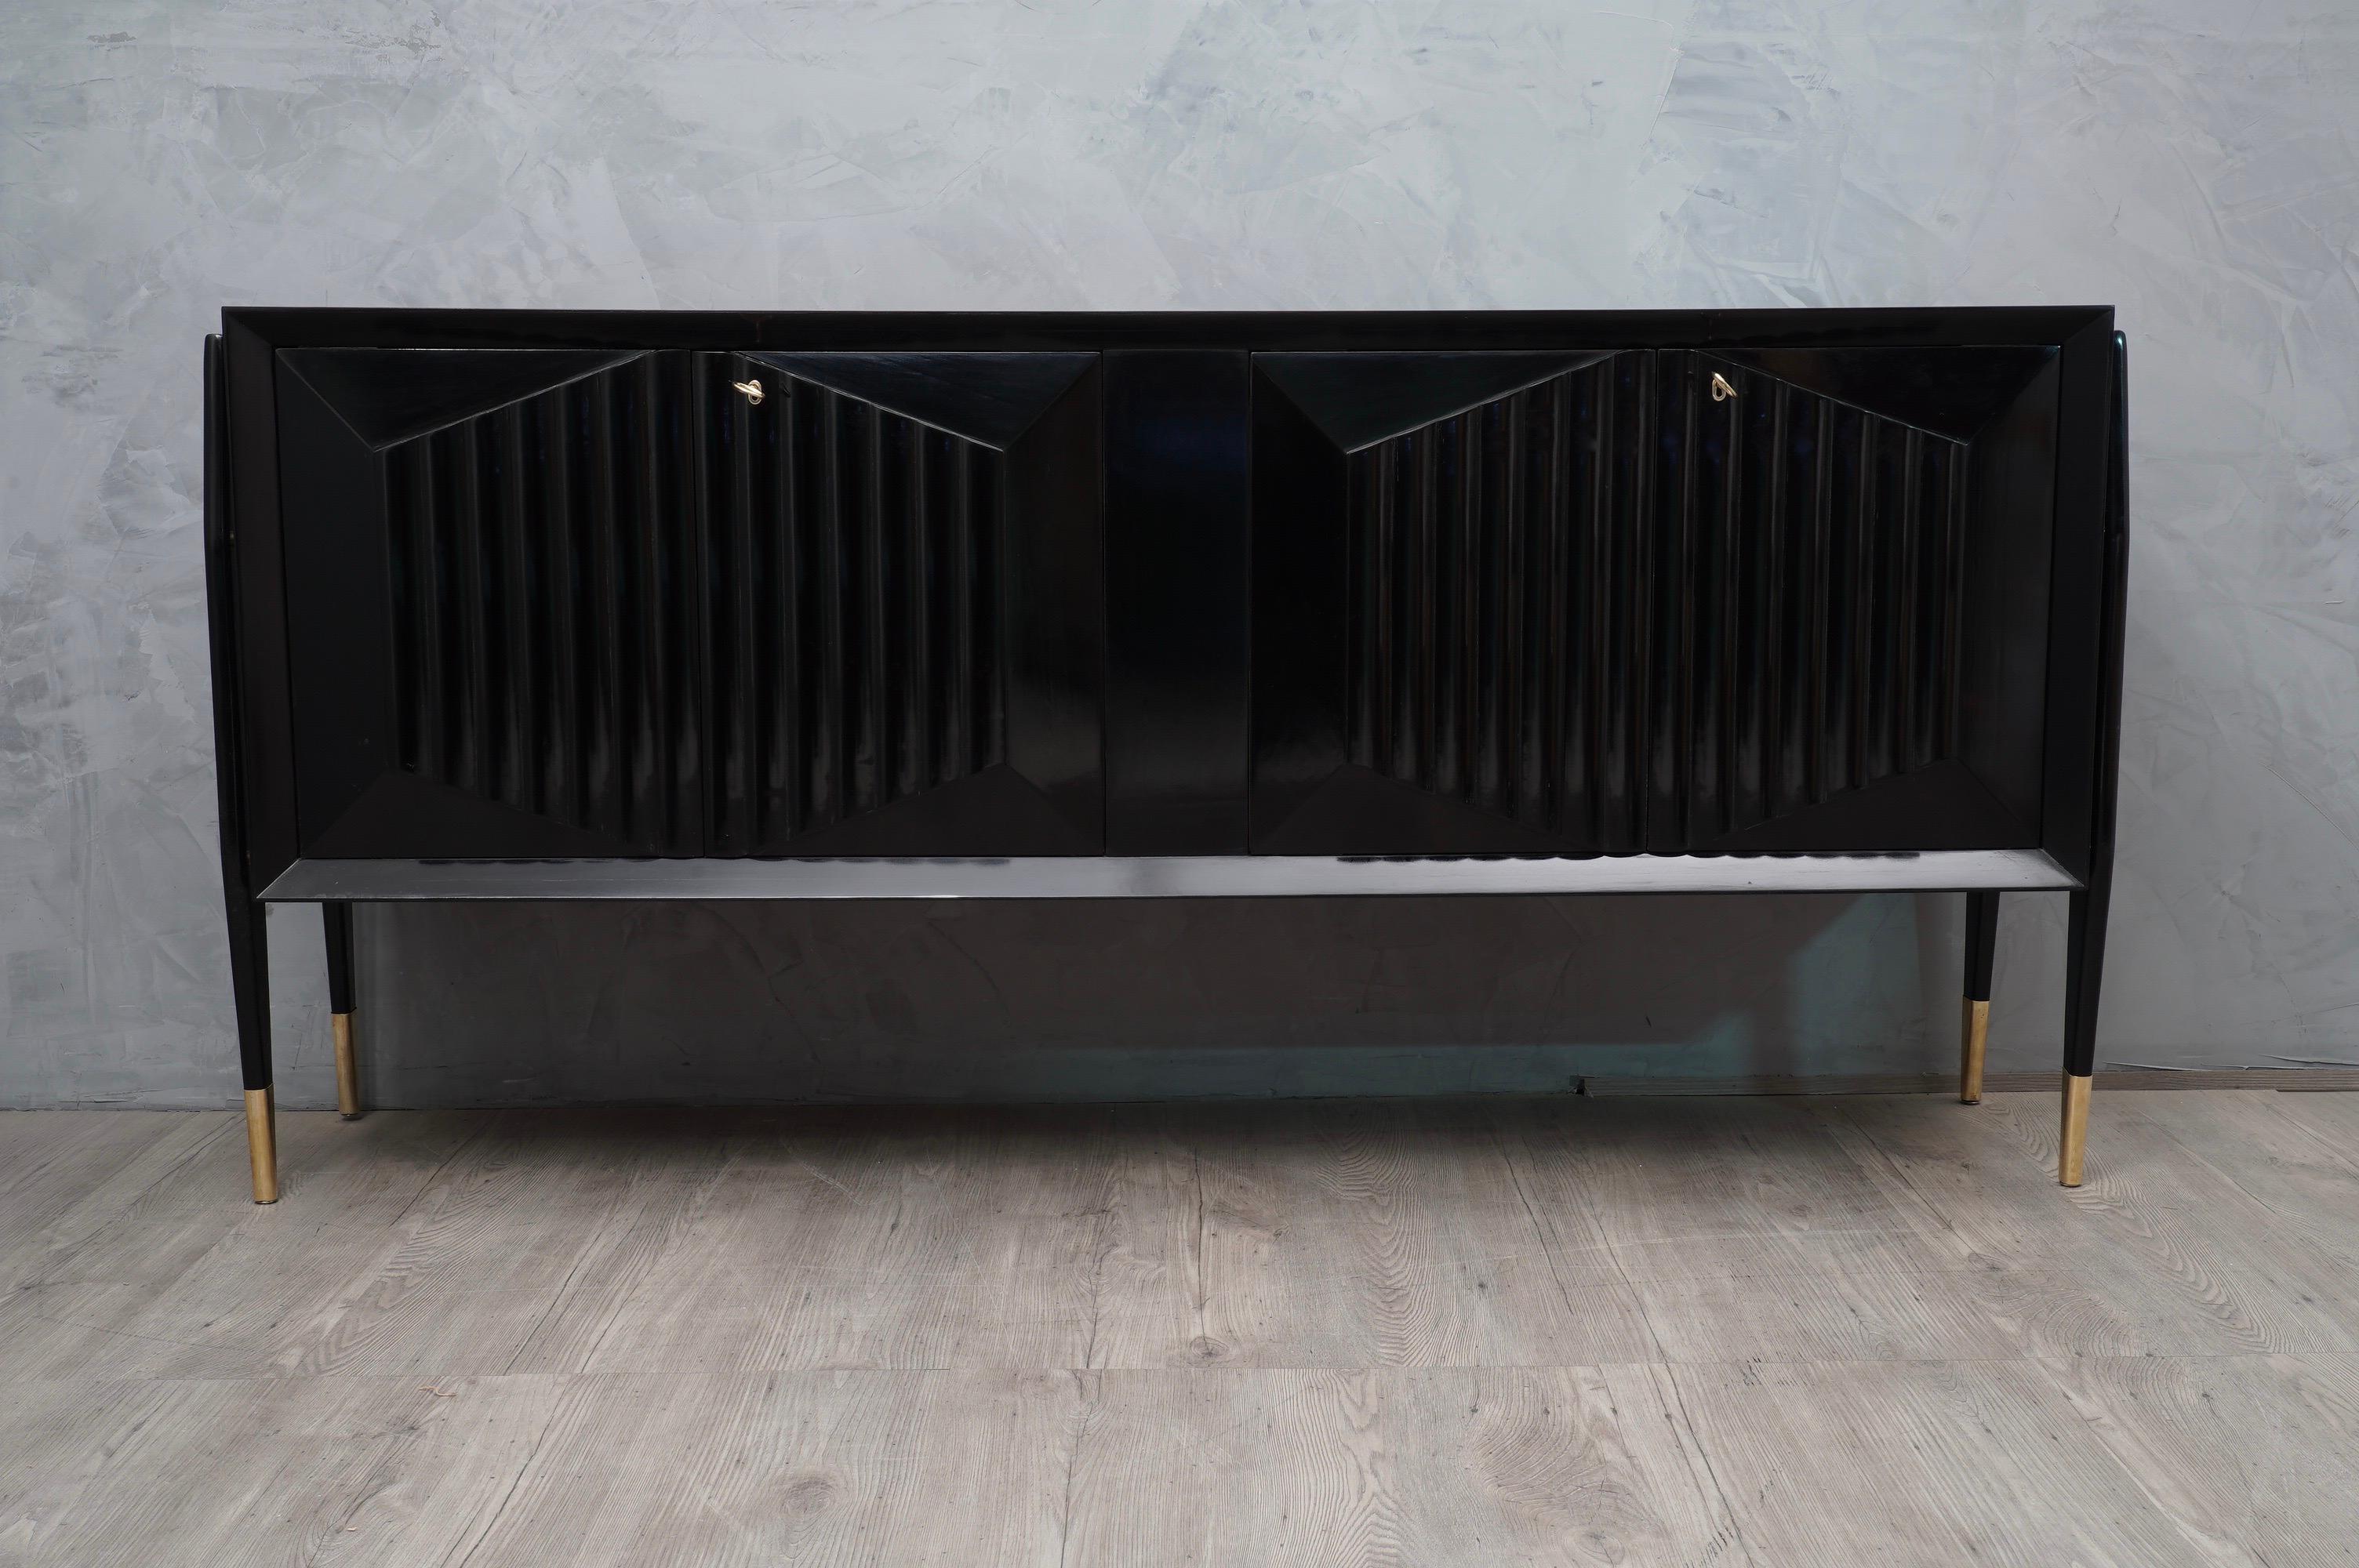 Wonderful Italian sideboards of the midcentury, precious in its processing. This sideboards has a very luxurious appearance, due the use of not common materials and the design.

All polished in black shellac. The structure is in wood, the top is